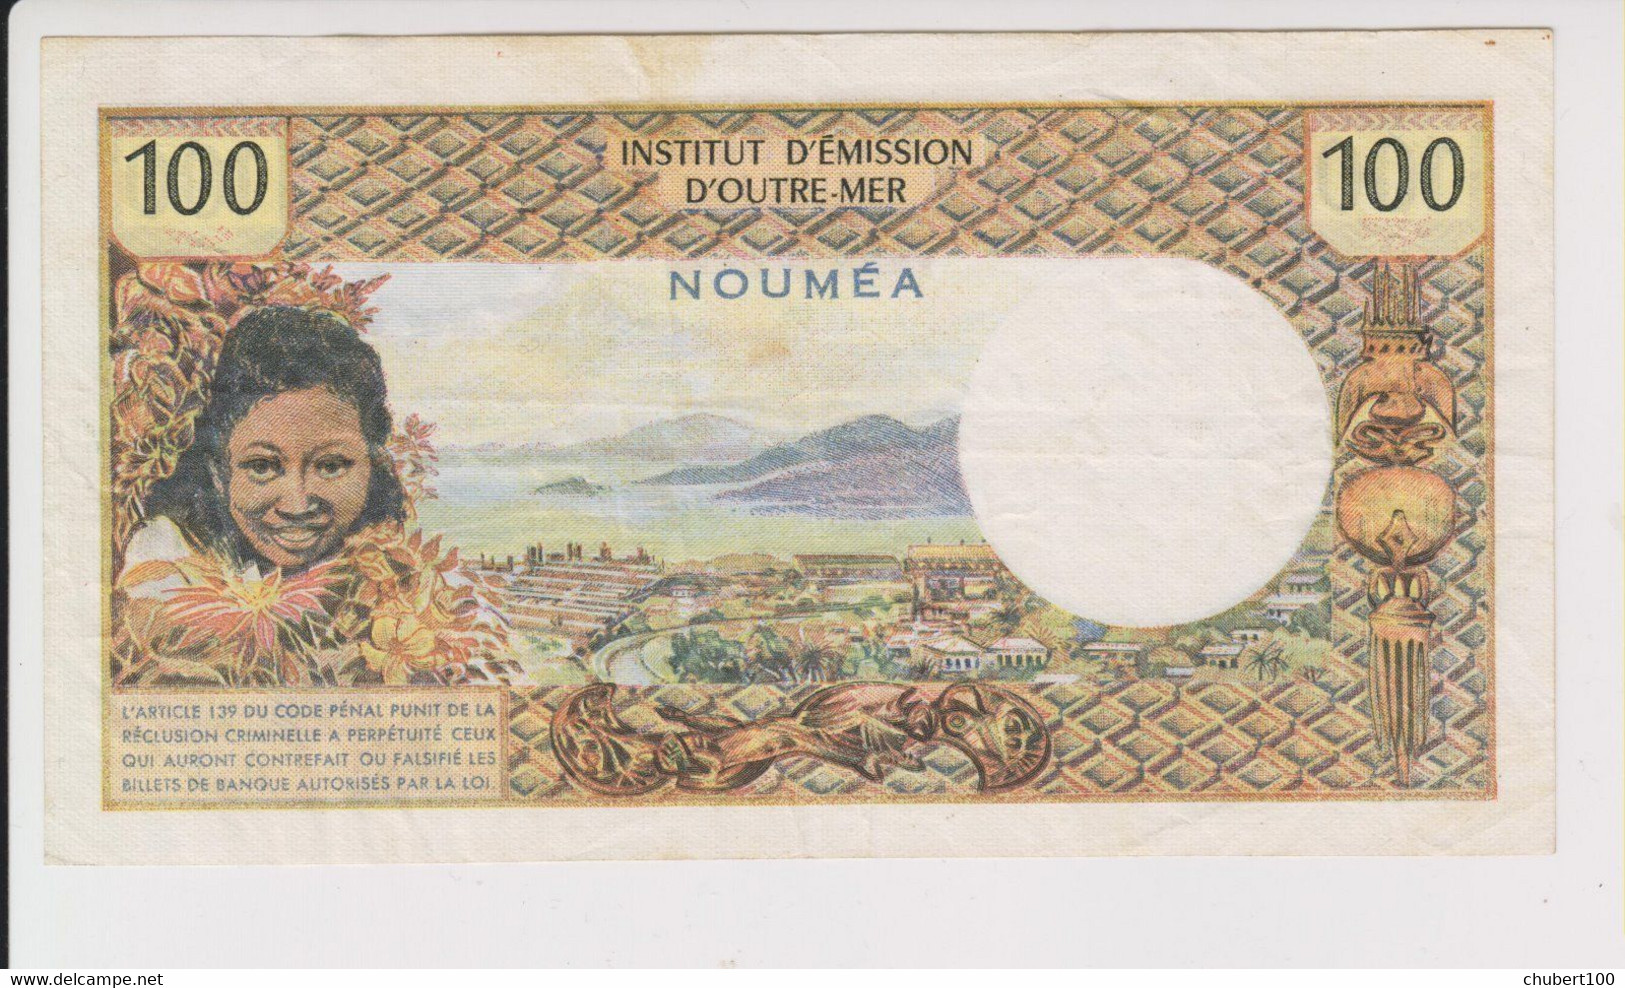 NEW CALEDONIA, P 59 ,  100 Francs ,  ND 1969 ,  VF/EF, First Prefix A1 - Nouvelle-Calédonie 1873-1985